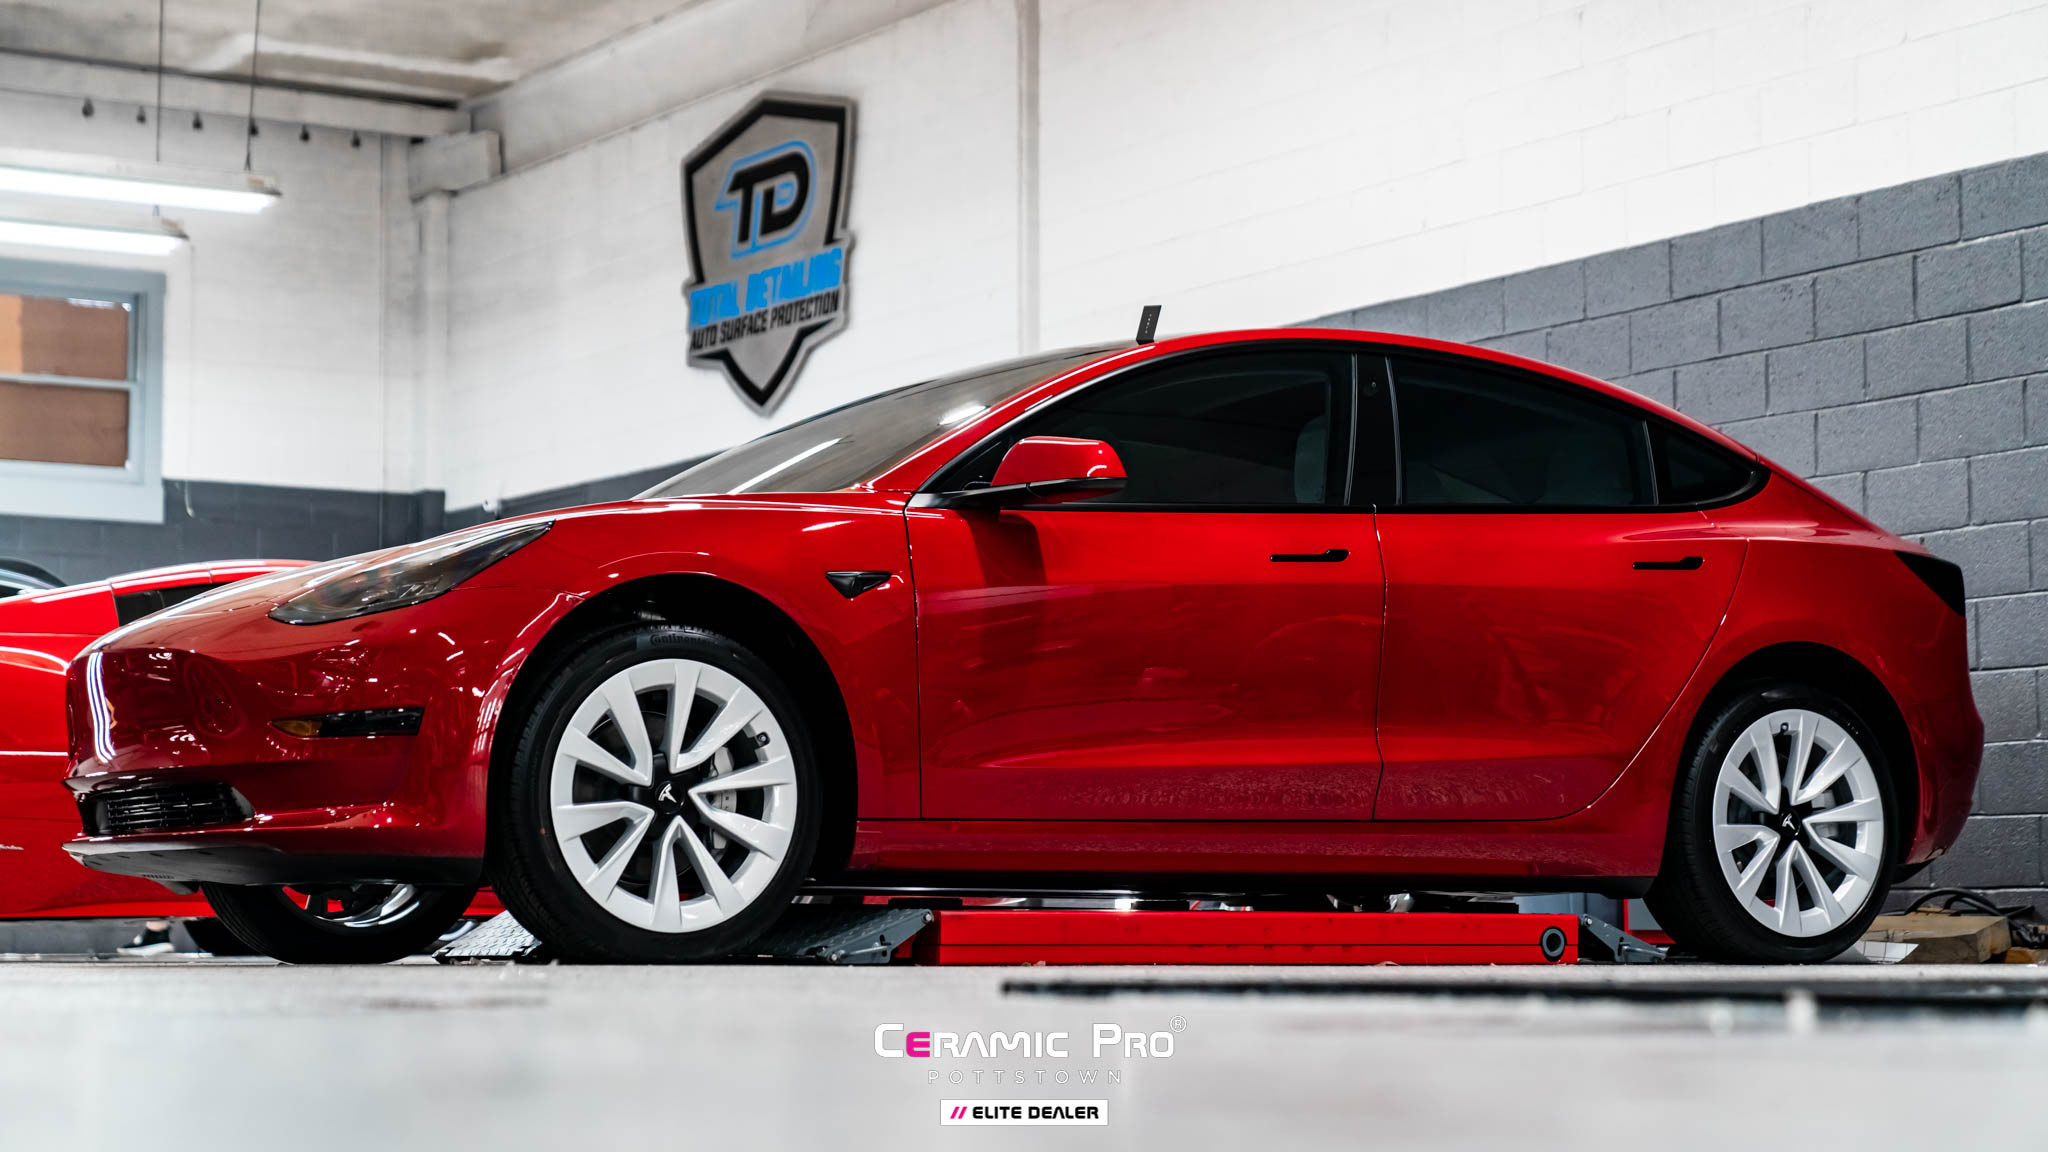 Customize the look of your Tesla with Ceramic Window Tint in Pottstown at PA.